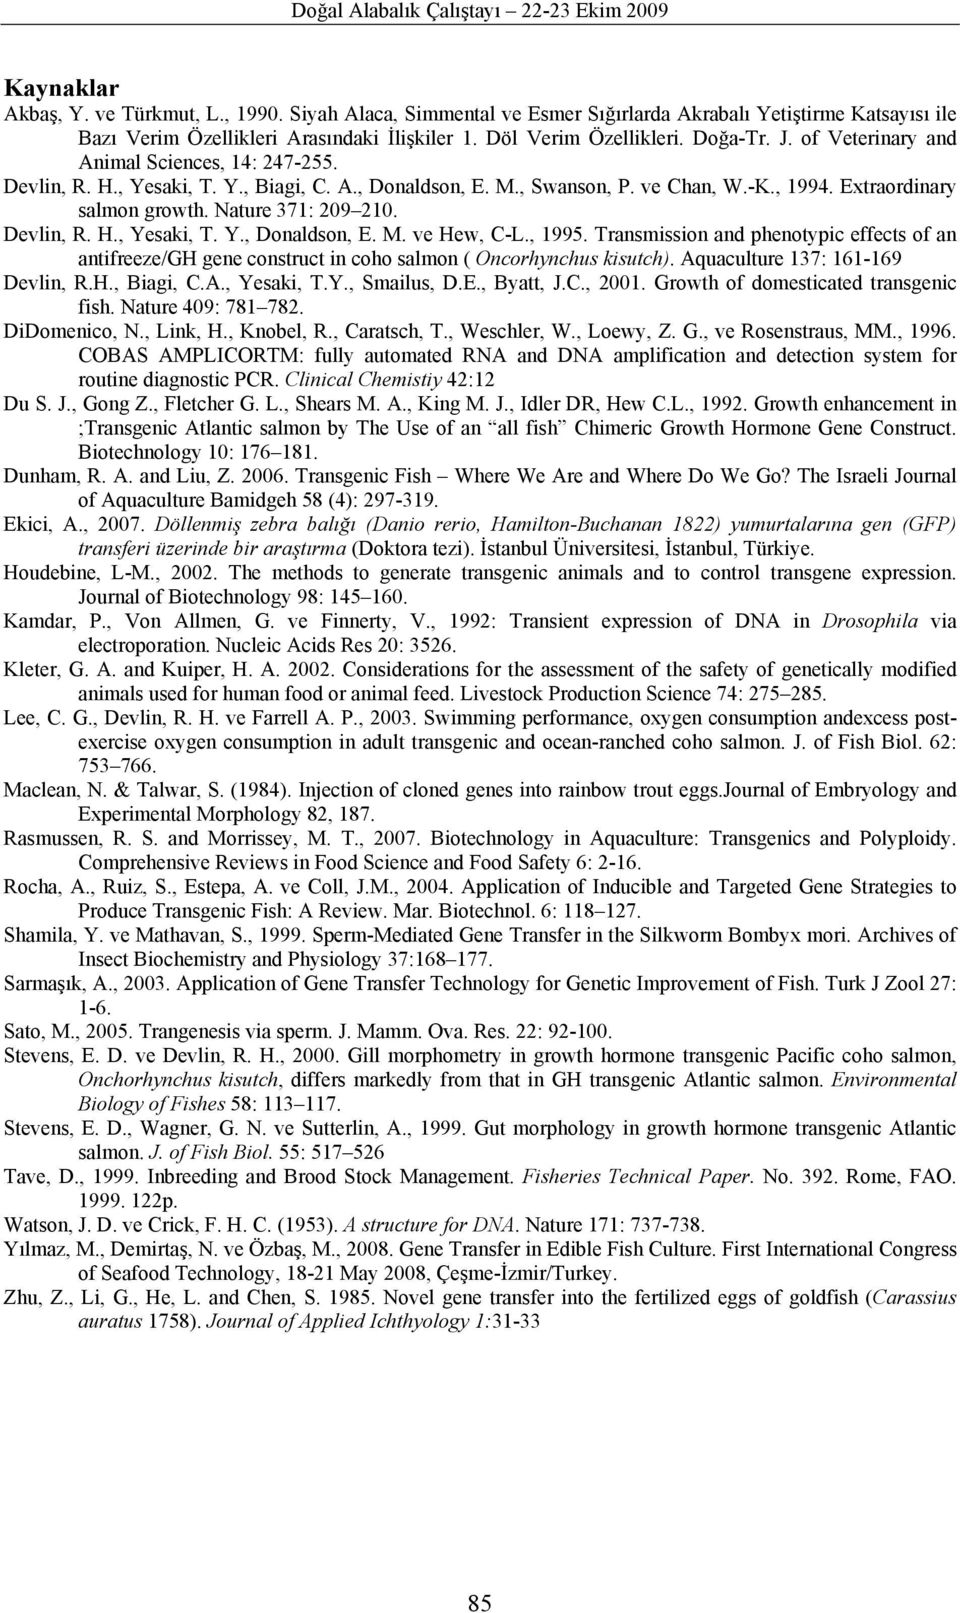 Devlin, R. H., Yesaki, T. Y., Donaldson, E. M. ve Hew, C-L., 1995. Transmission and phenotypic effects of an antifreeze/gh gene construct in coho salmon ( Oncorhynchus kisutch).